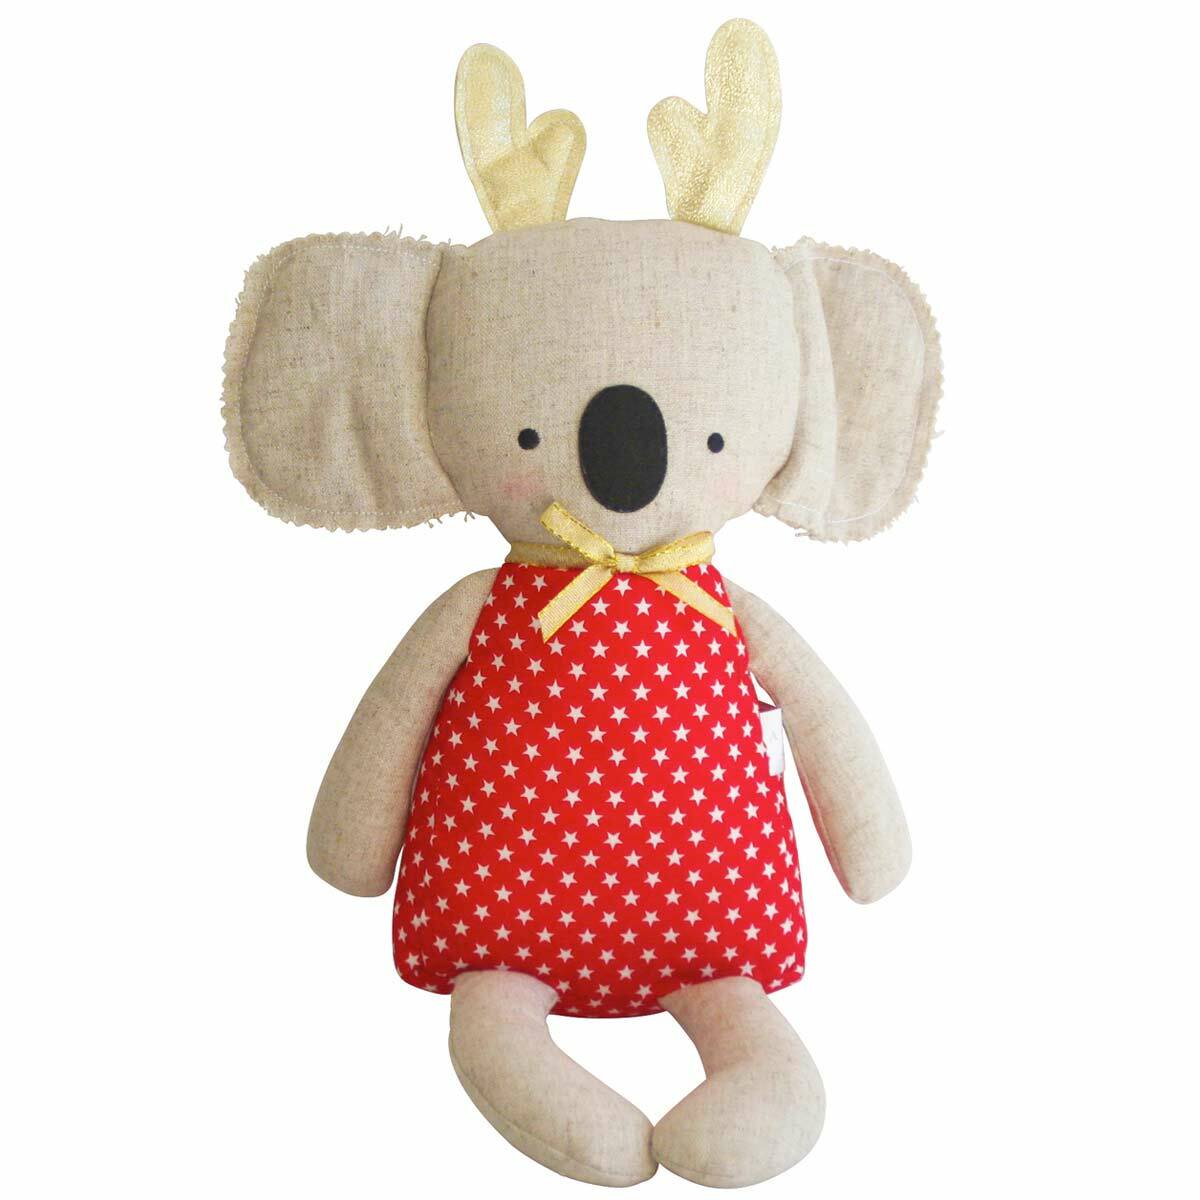 SpearmintLOVE’s baby Koala with Antlers Doll, Red Star